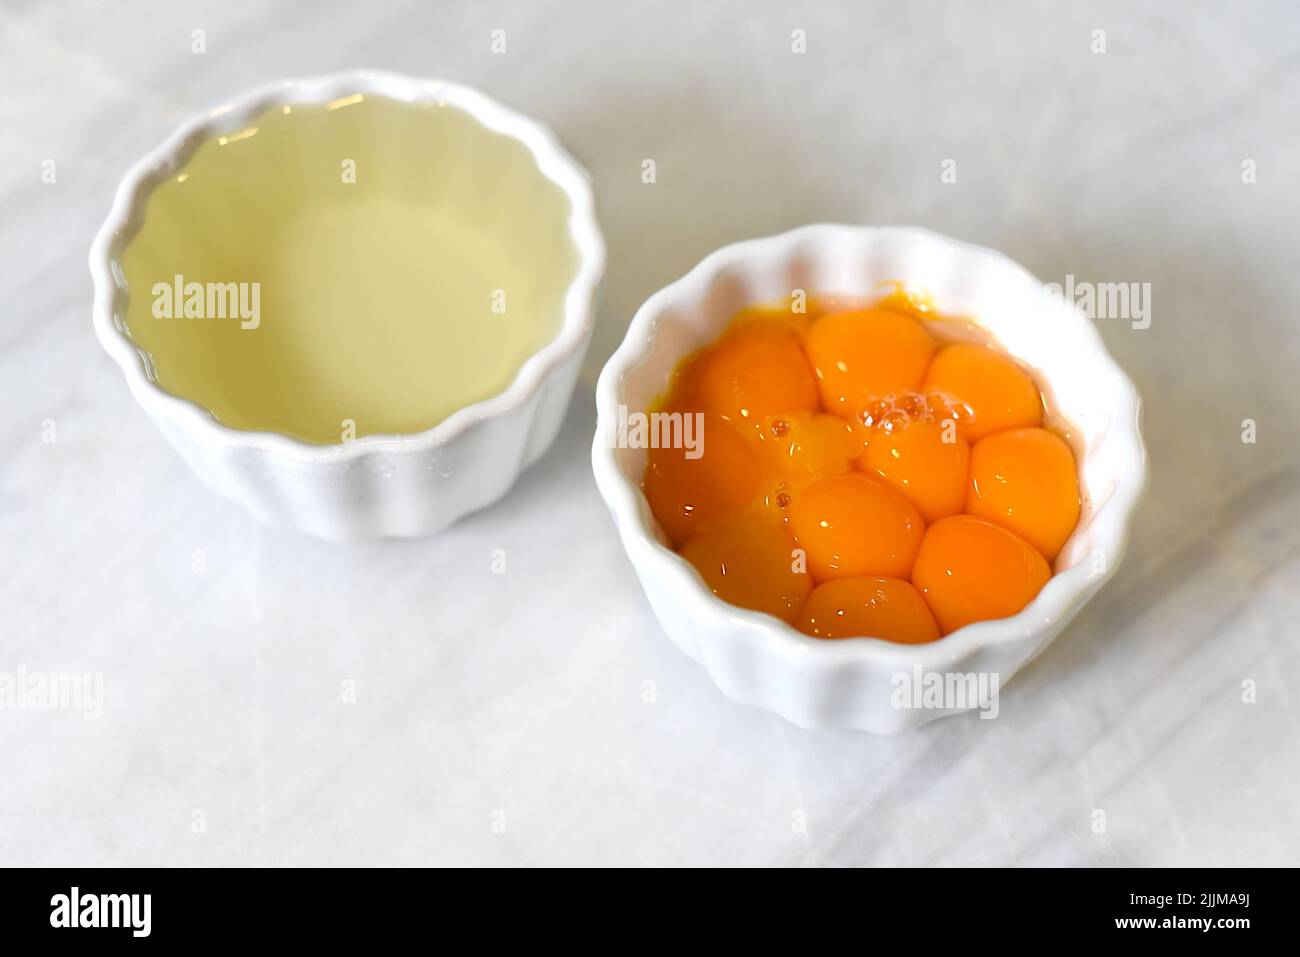 Separated yolk and egg white prepared for baking Stock Photo